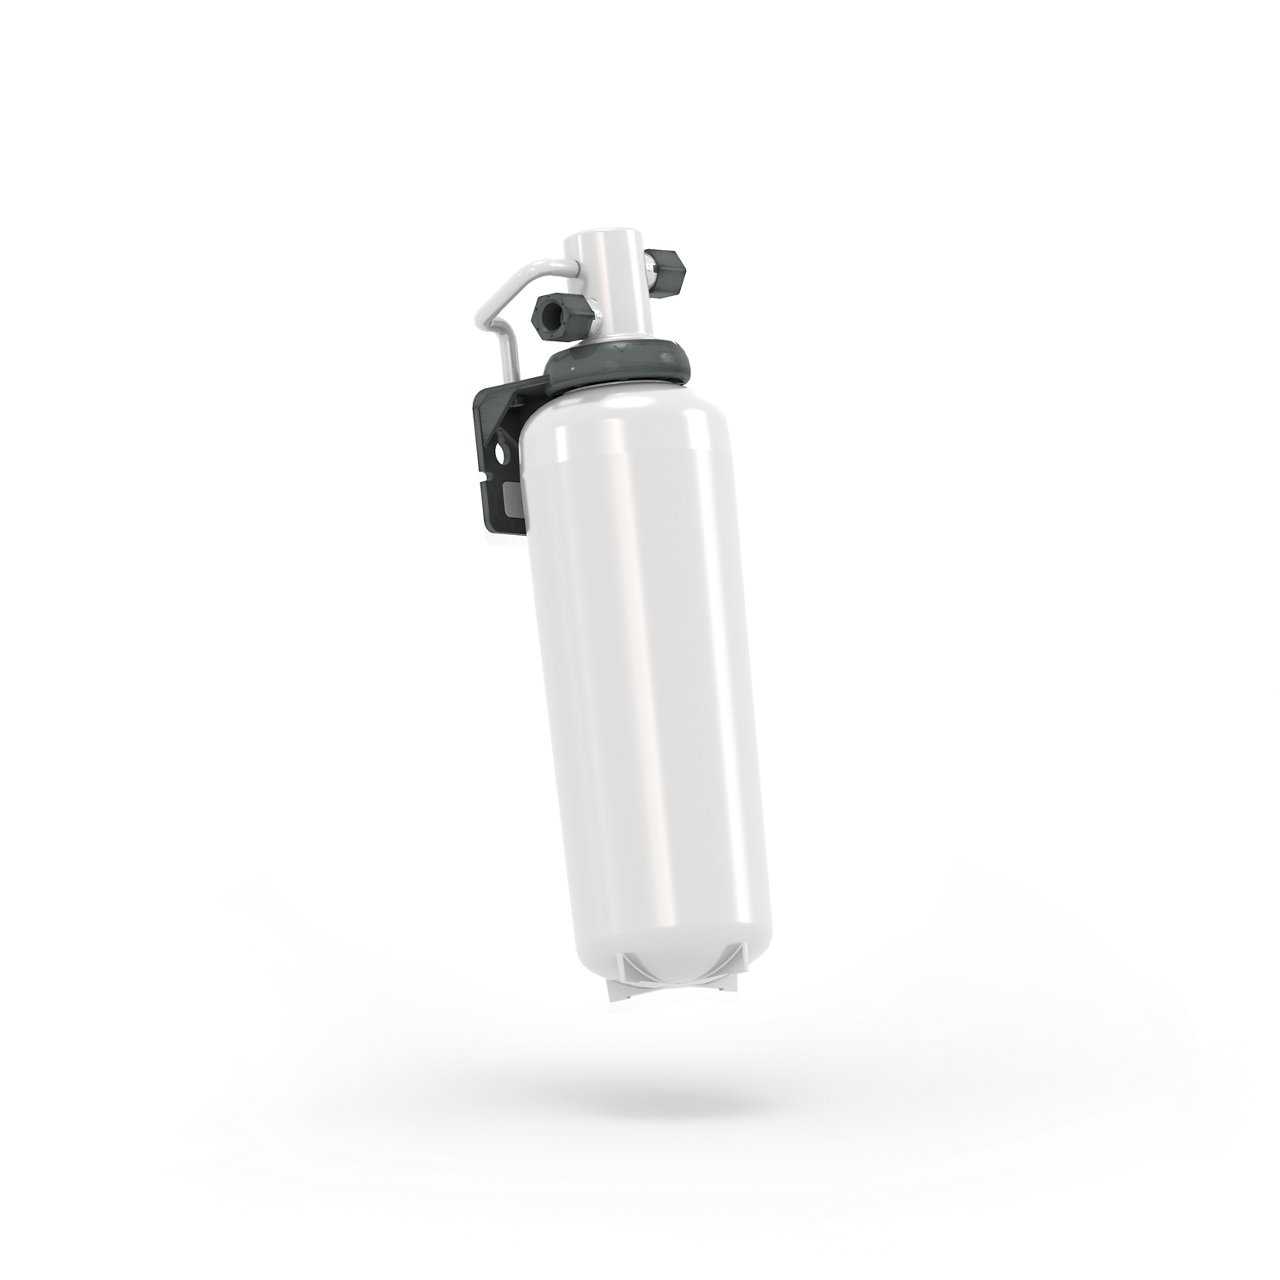 Rendered image of the 3M™ Aqua-Pure™ Under Sink Water Filter System, 3MFF100